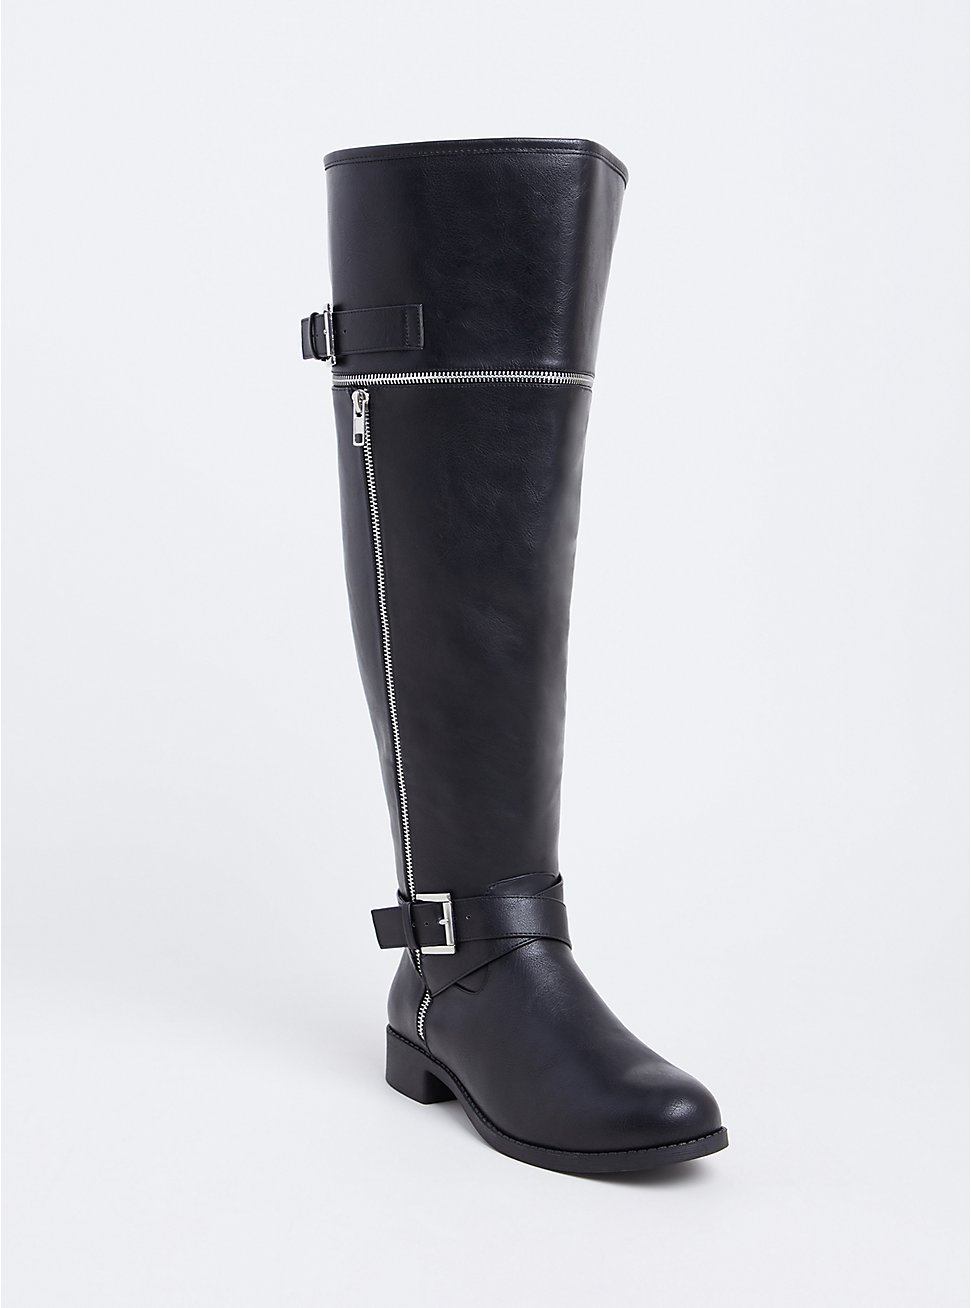 Plus Size - Black Faux Leather Zipper & Buckle Over-the-Knee Boot (WW ...